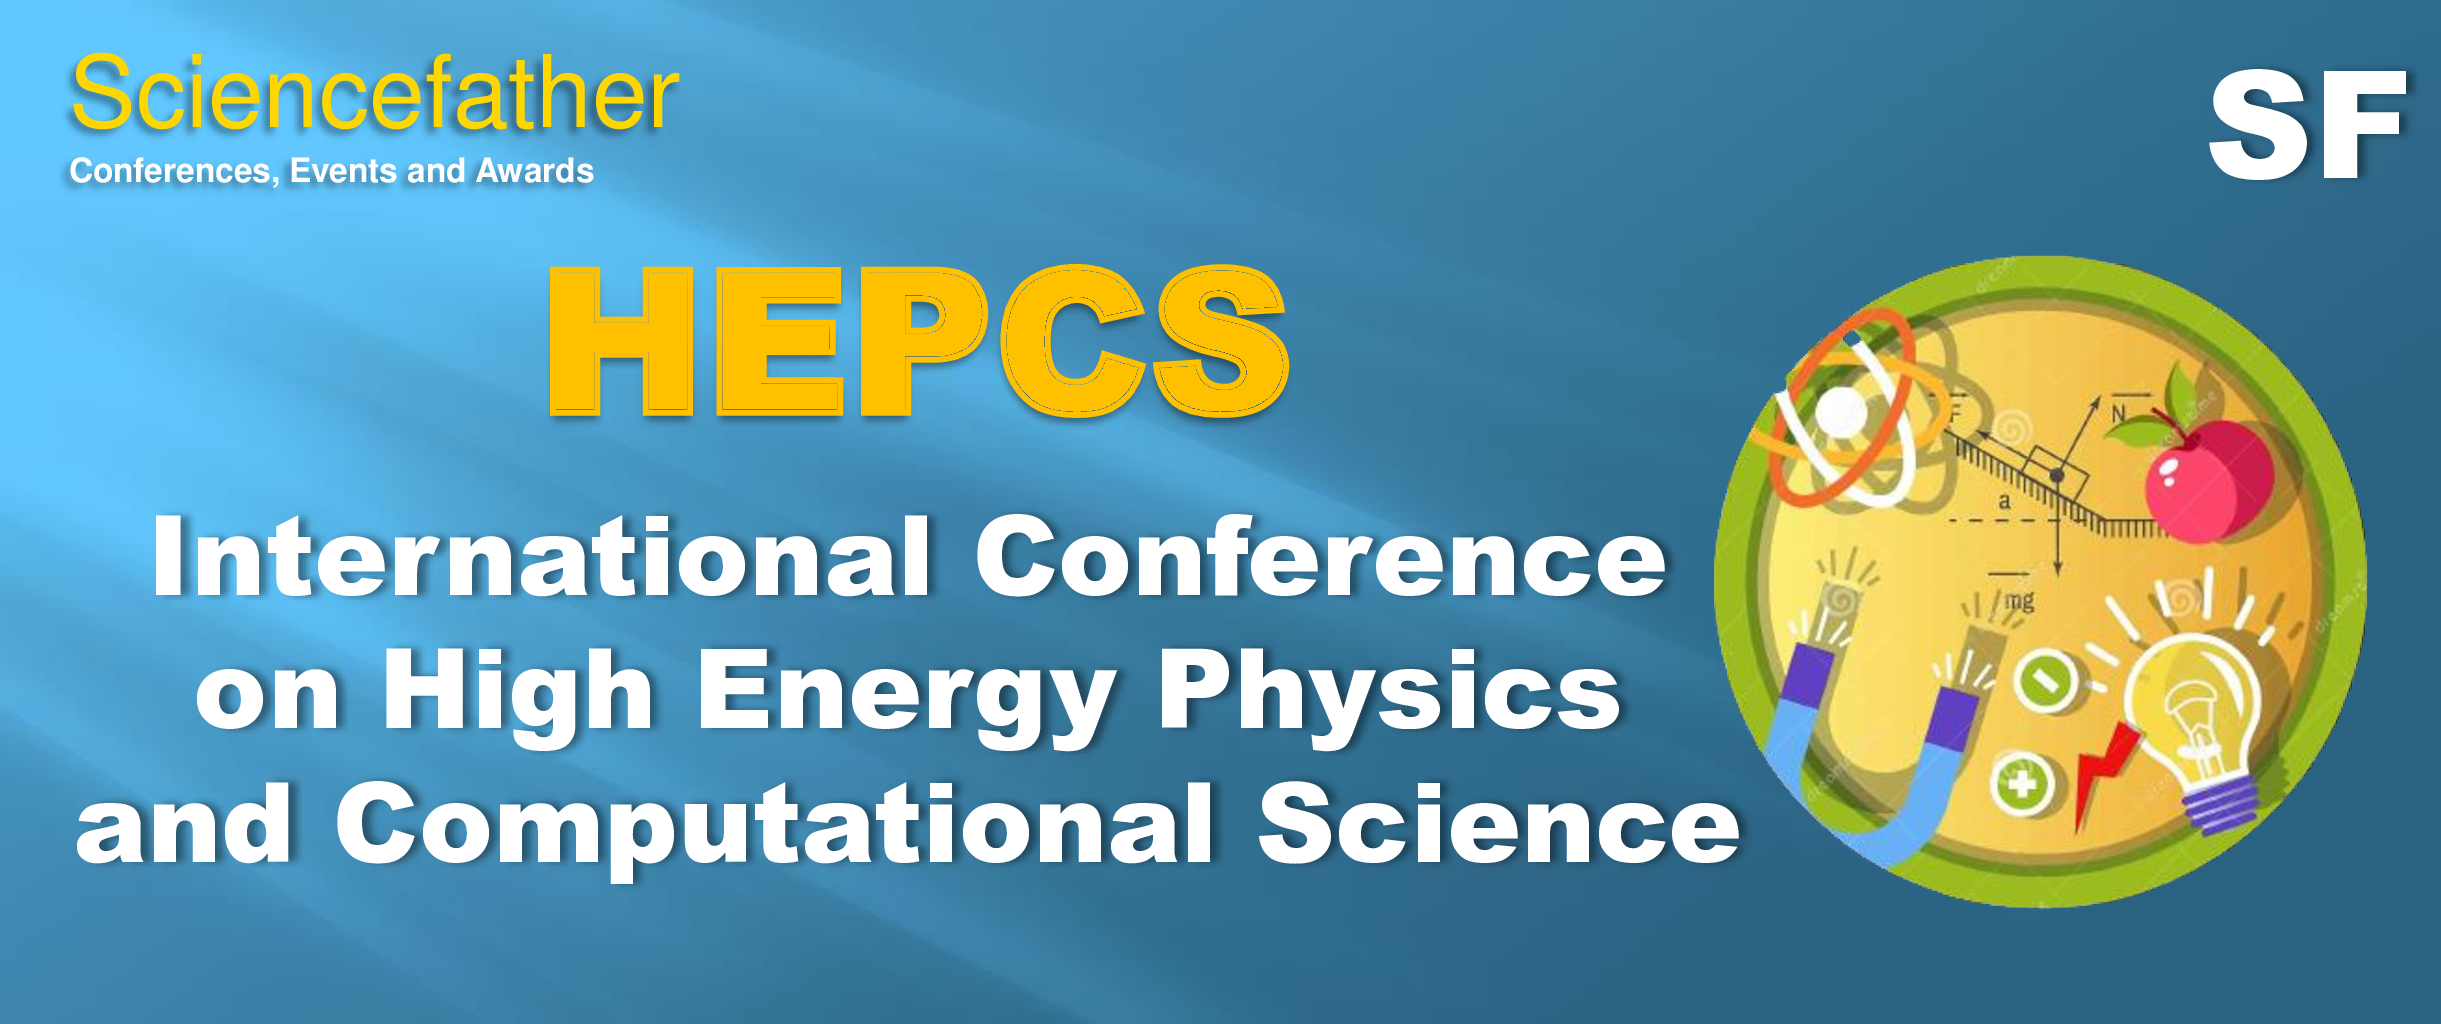 conference　2022　machine　Conferences　Physics　learning